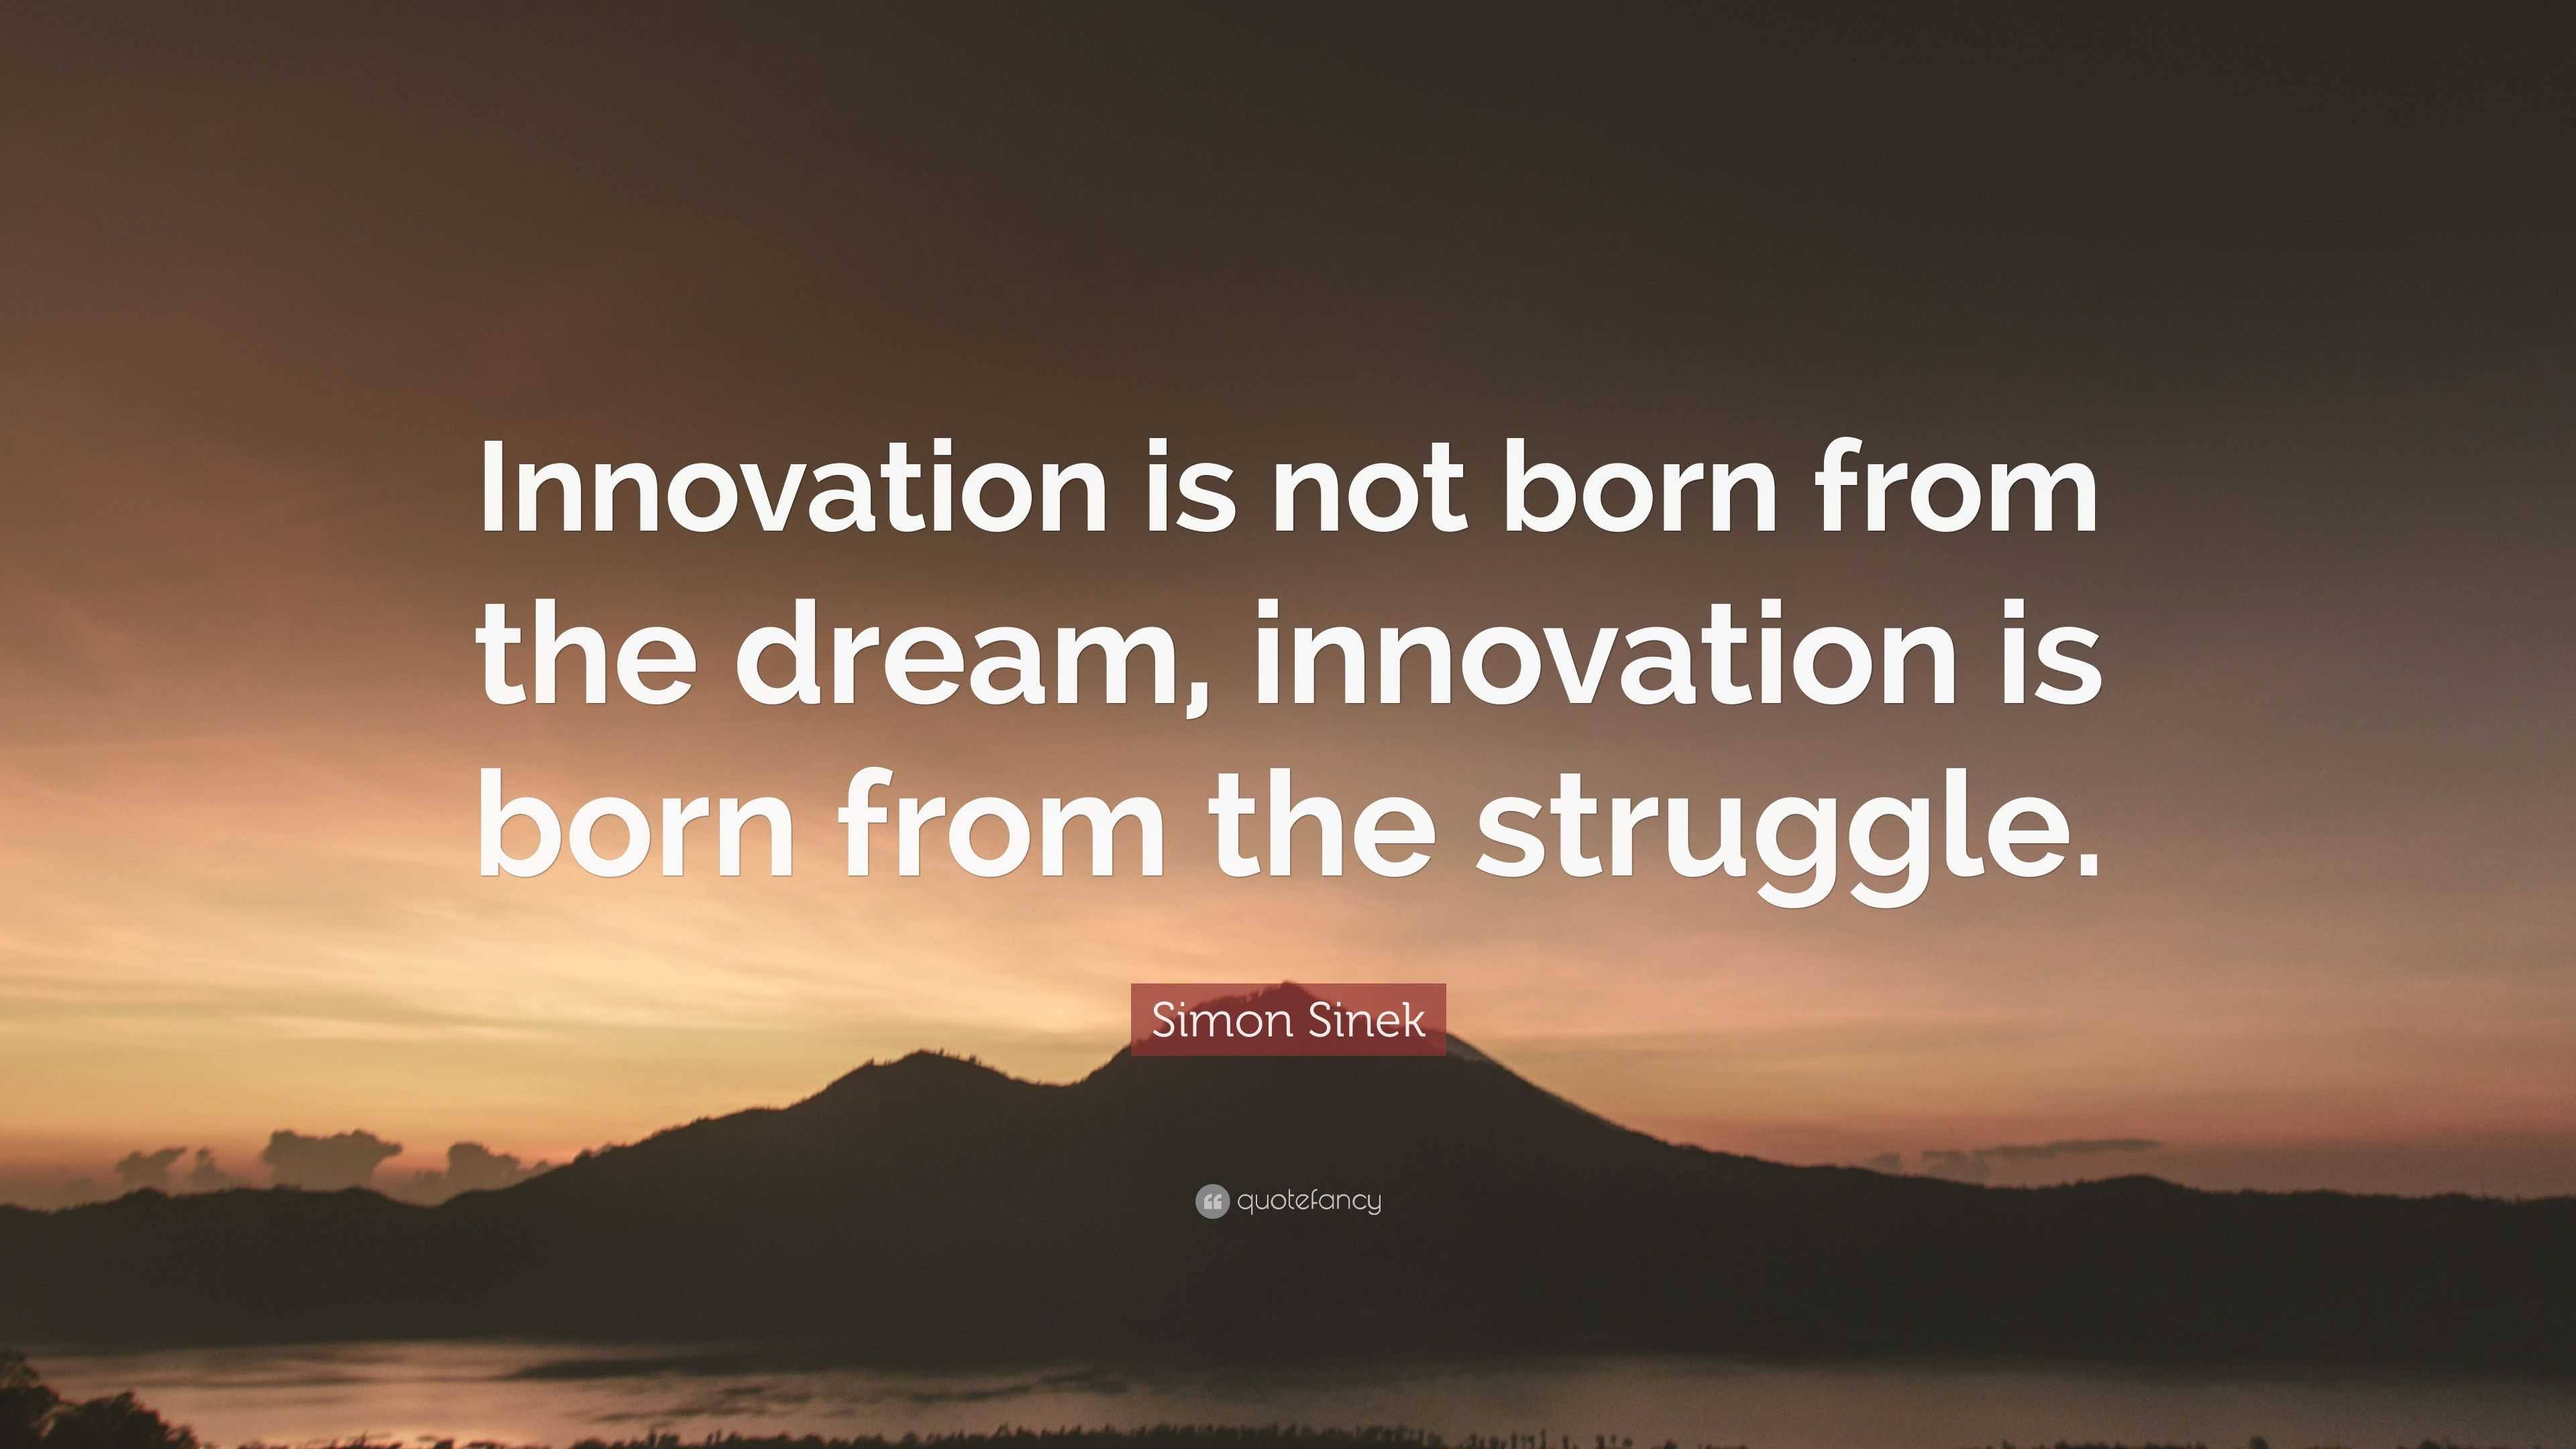 Simon Sinek Quote: “Innovation is not born from the dream, innovation